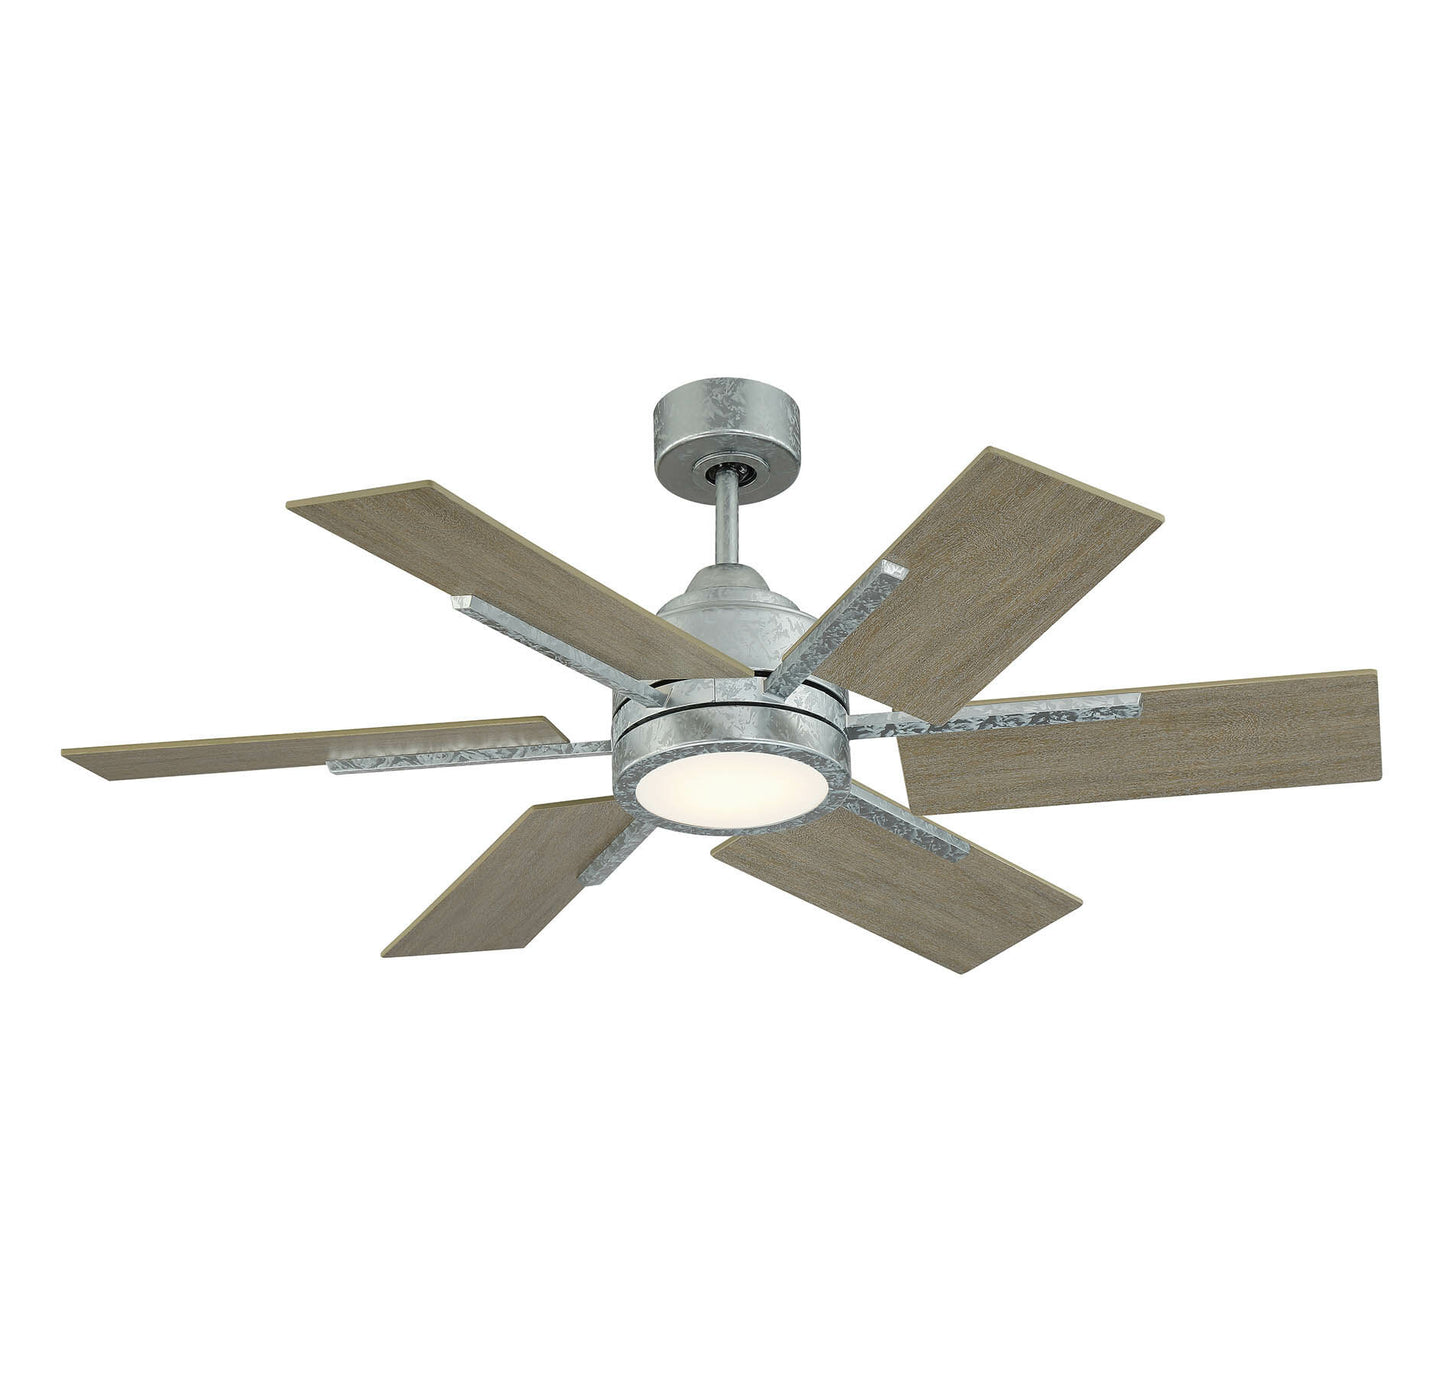 44-770-6WO-168 Farmhouse II 44-IN LED Ceiling Fan in Galvanized +Remote MSRP: $658 CLEARANCE DISCOUNT! LOC:Rug-3,S